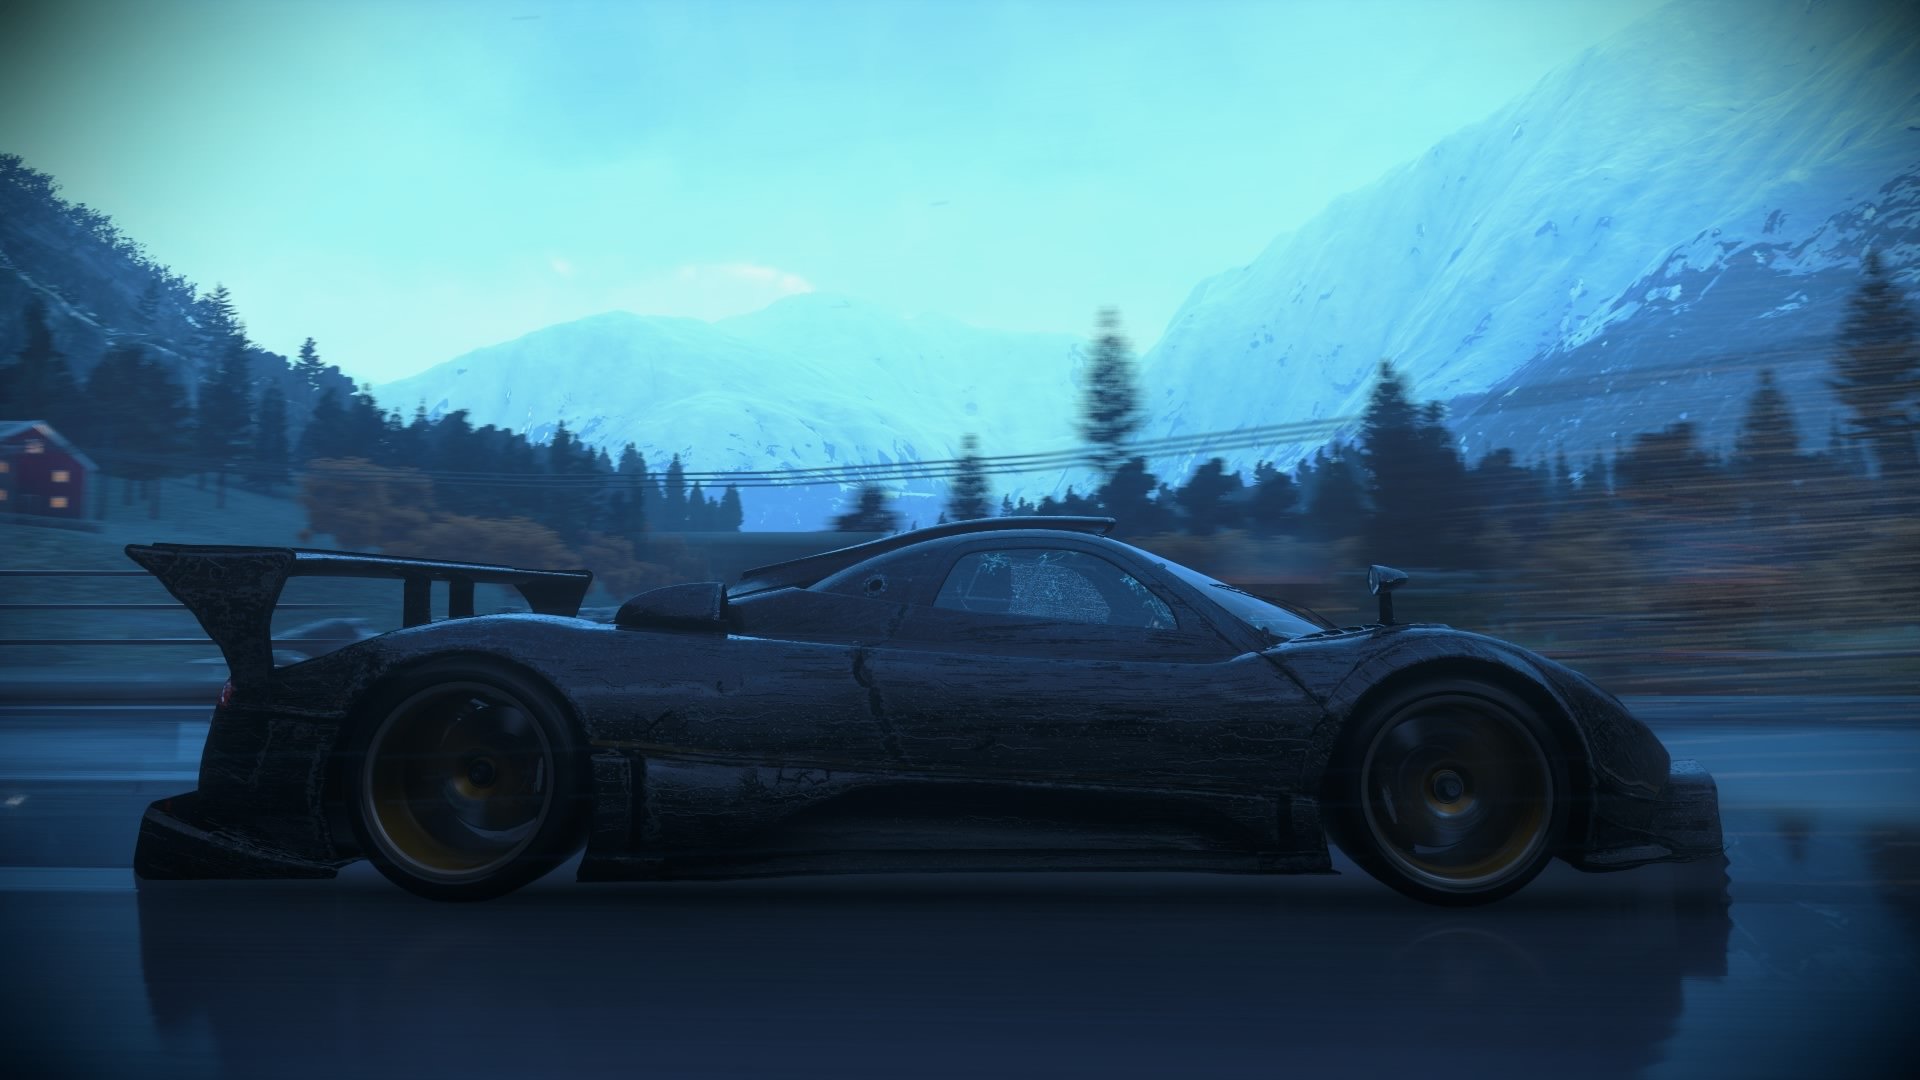 DriveClub Has Jaw Dropping Lighting, Weather Effects & Astonishing Graphics, Beats ...1920 x 1080